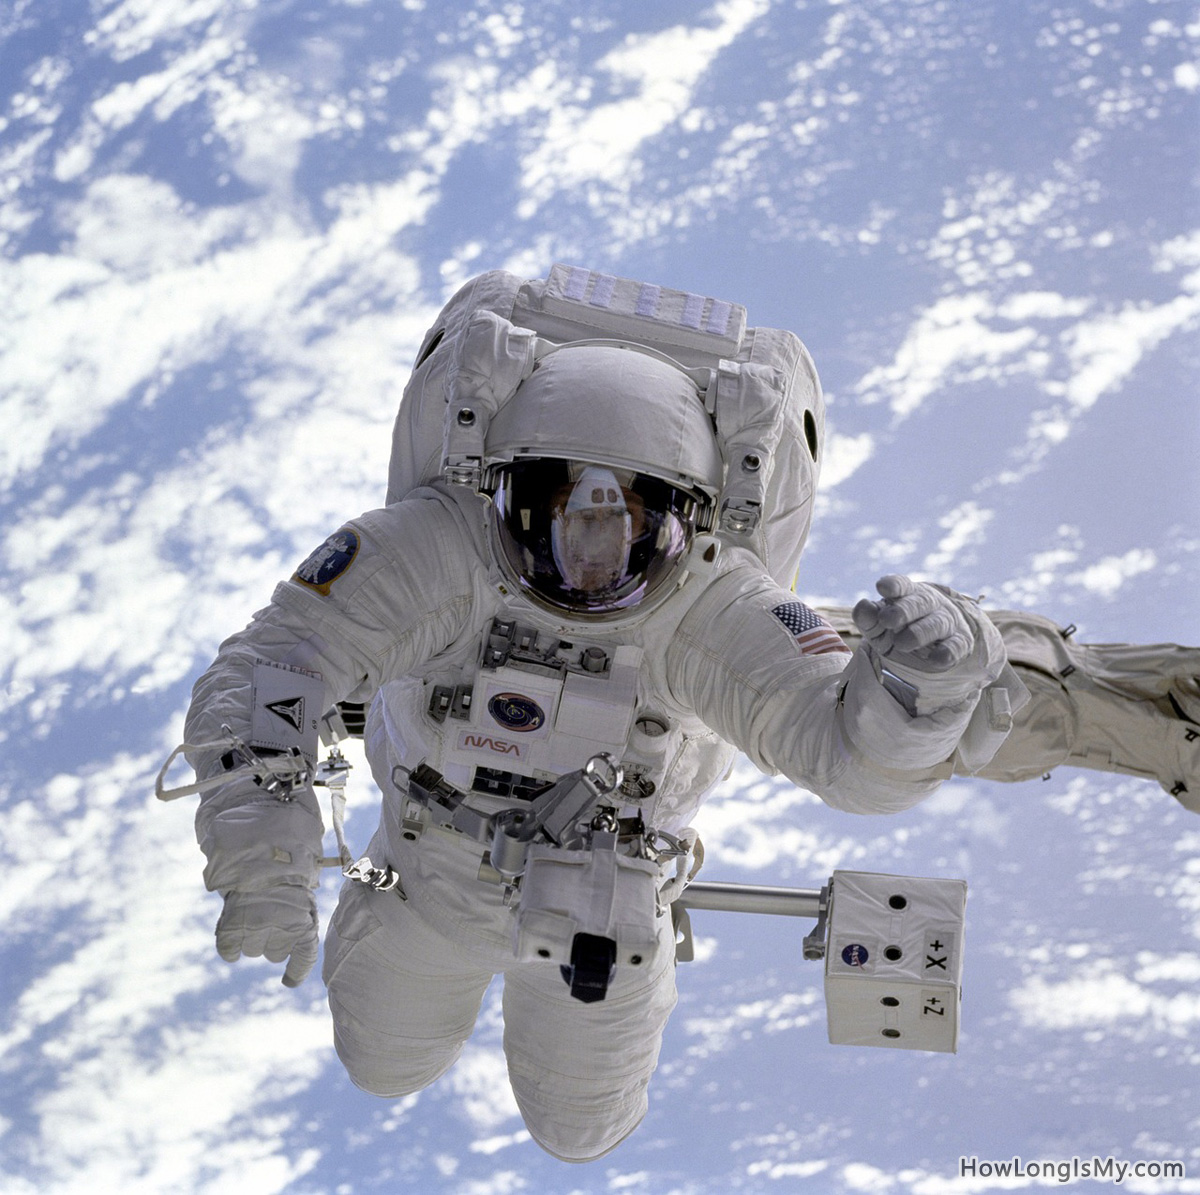 extendet-time-being-away-from-earth-astronaut